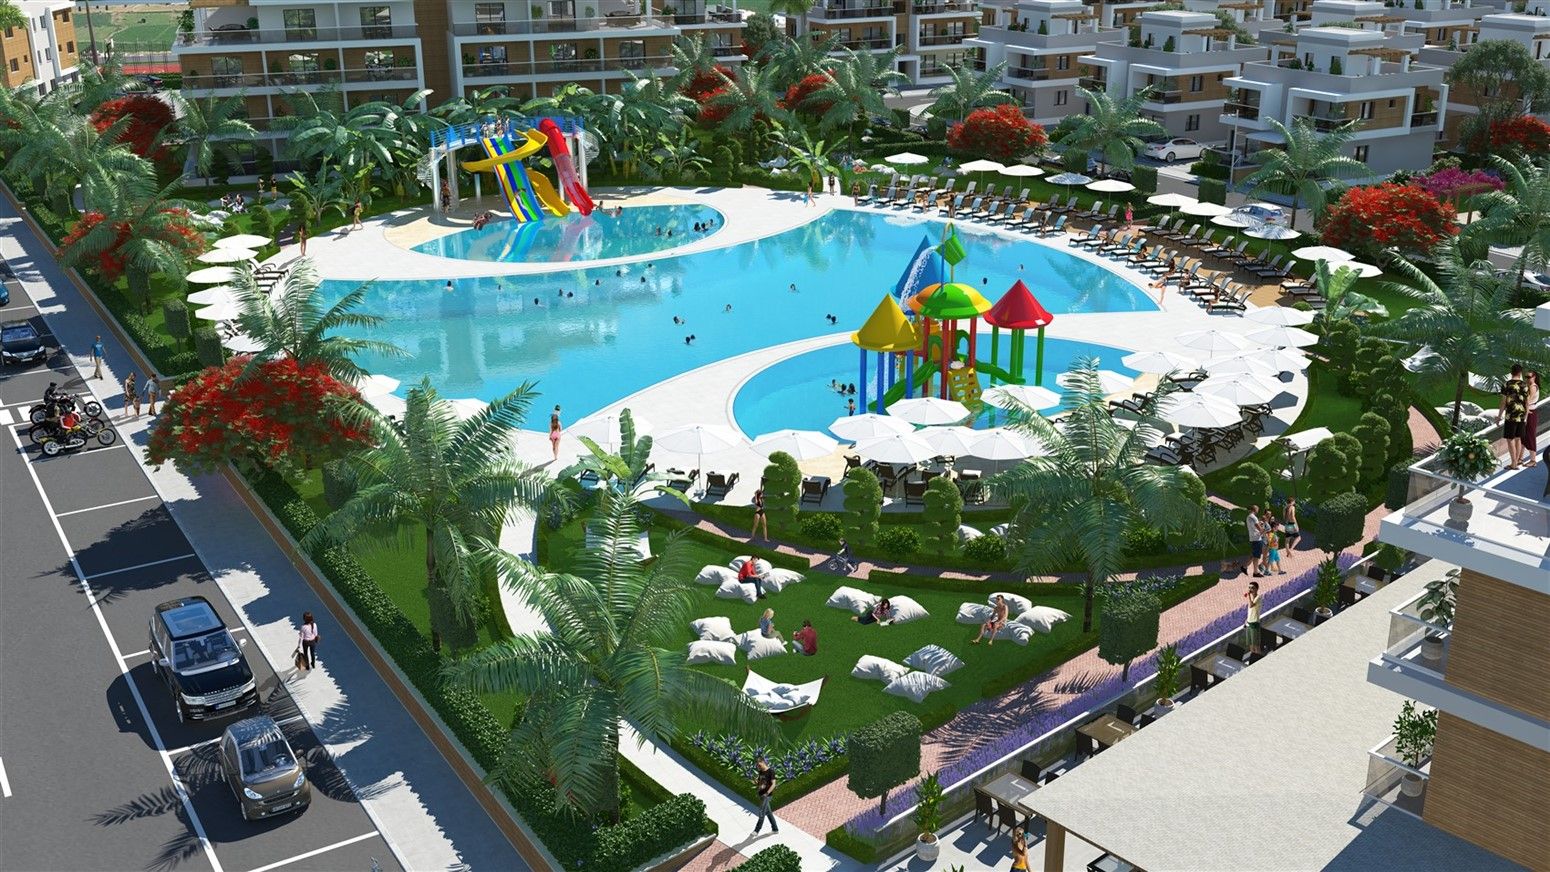 Twin villas under construction in large-scale project in Northern Cyprus